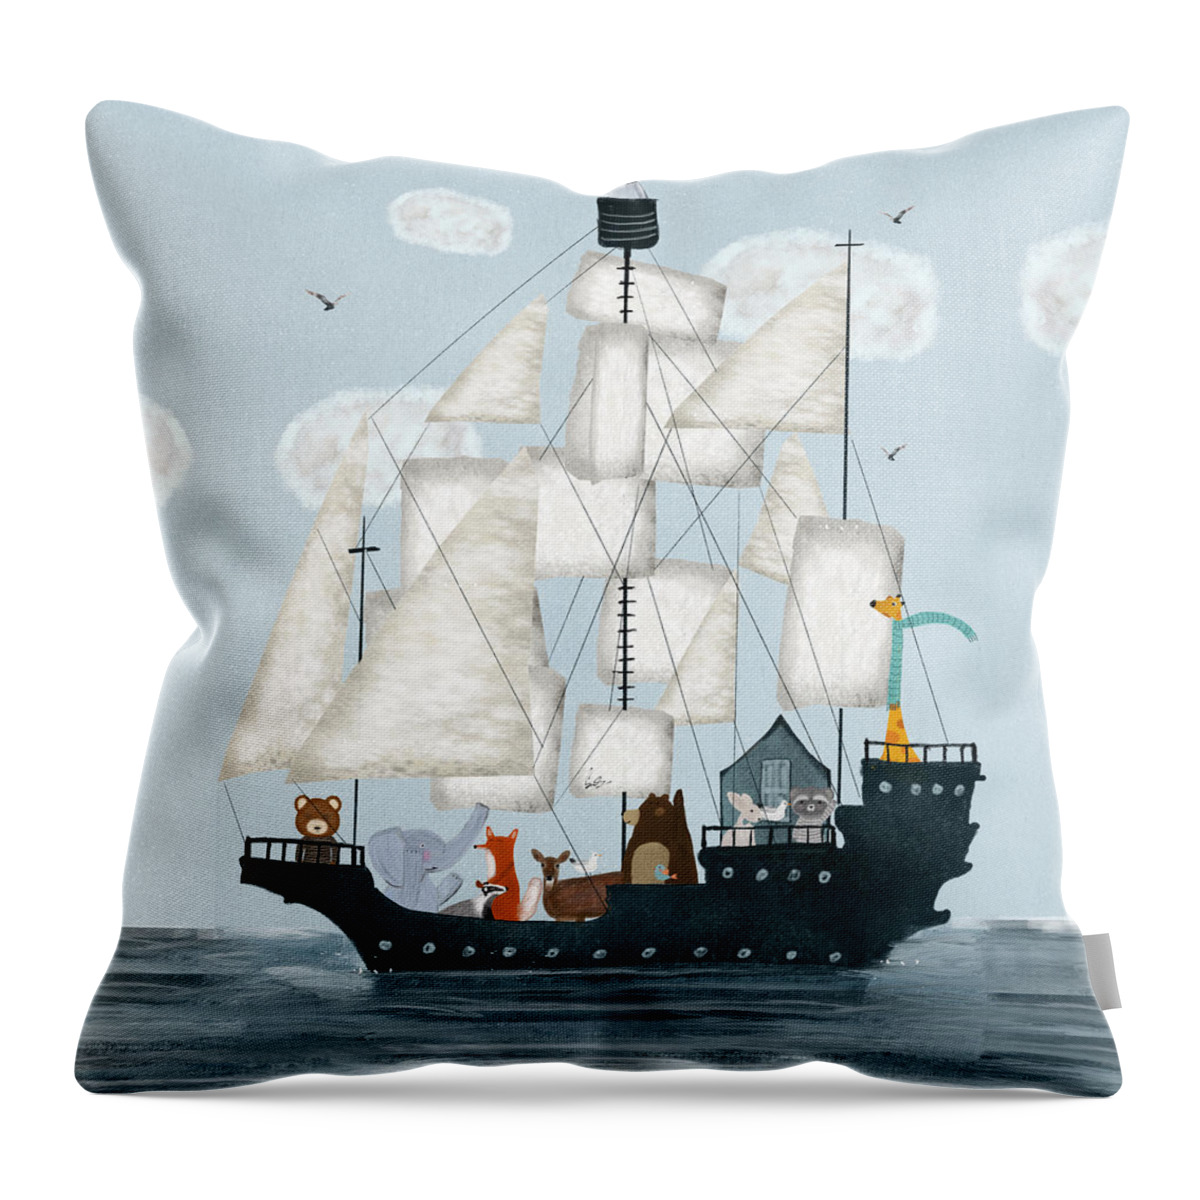 Nautical Throw Pillow featuring the painting A Nautical Adventure by Bri Buckley